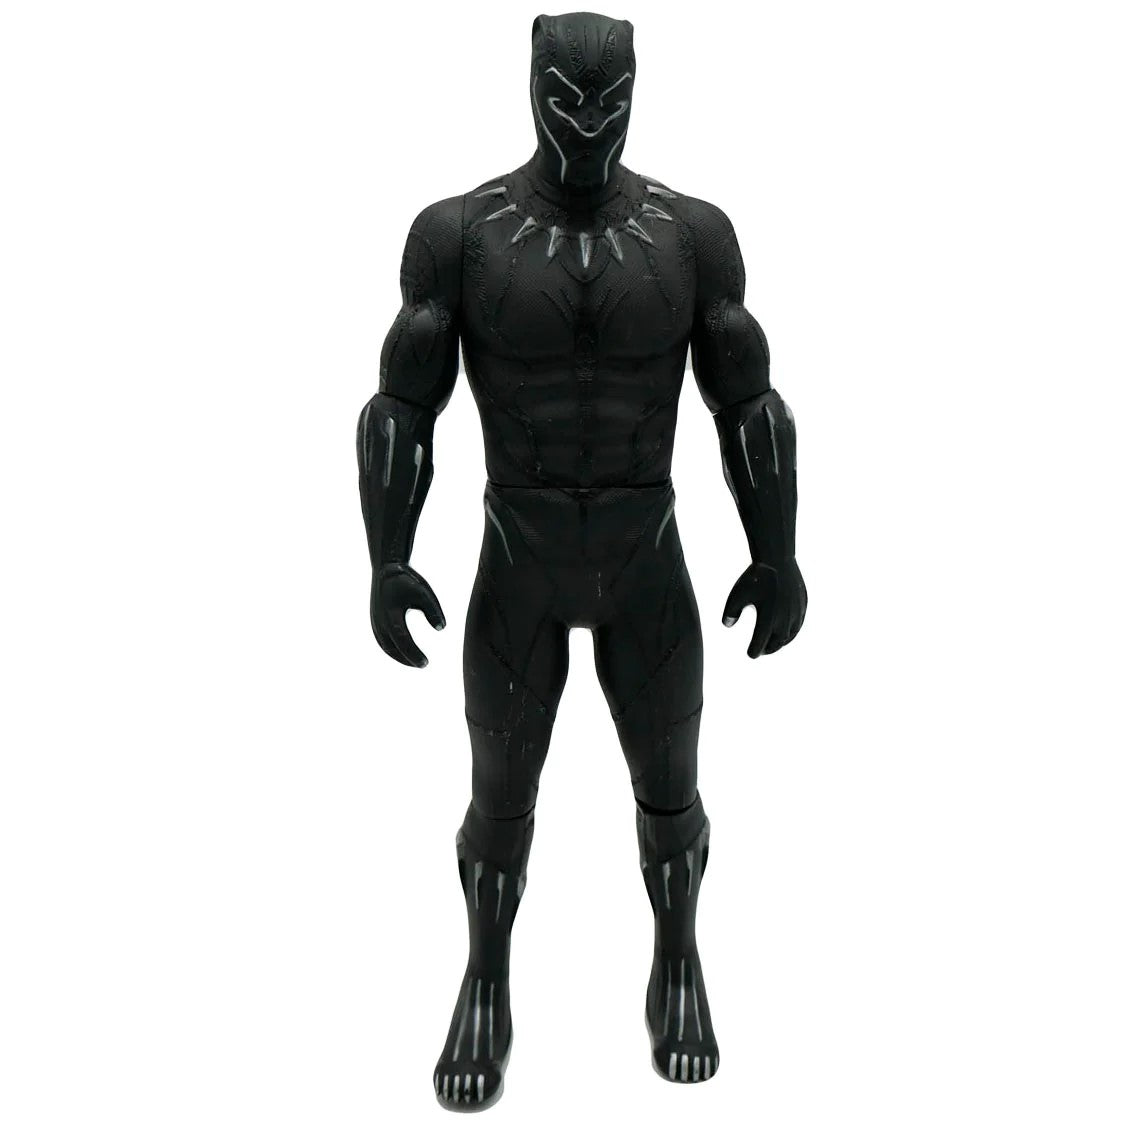 Avengers Black Panther 34cm Action Figure | Toys in Dar Tanzania